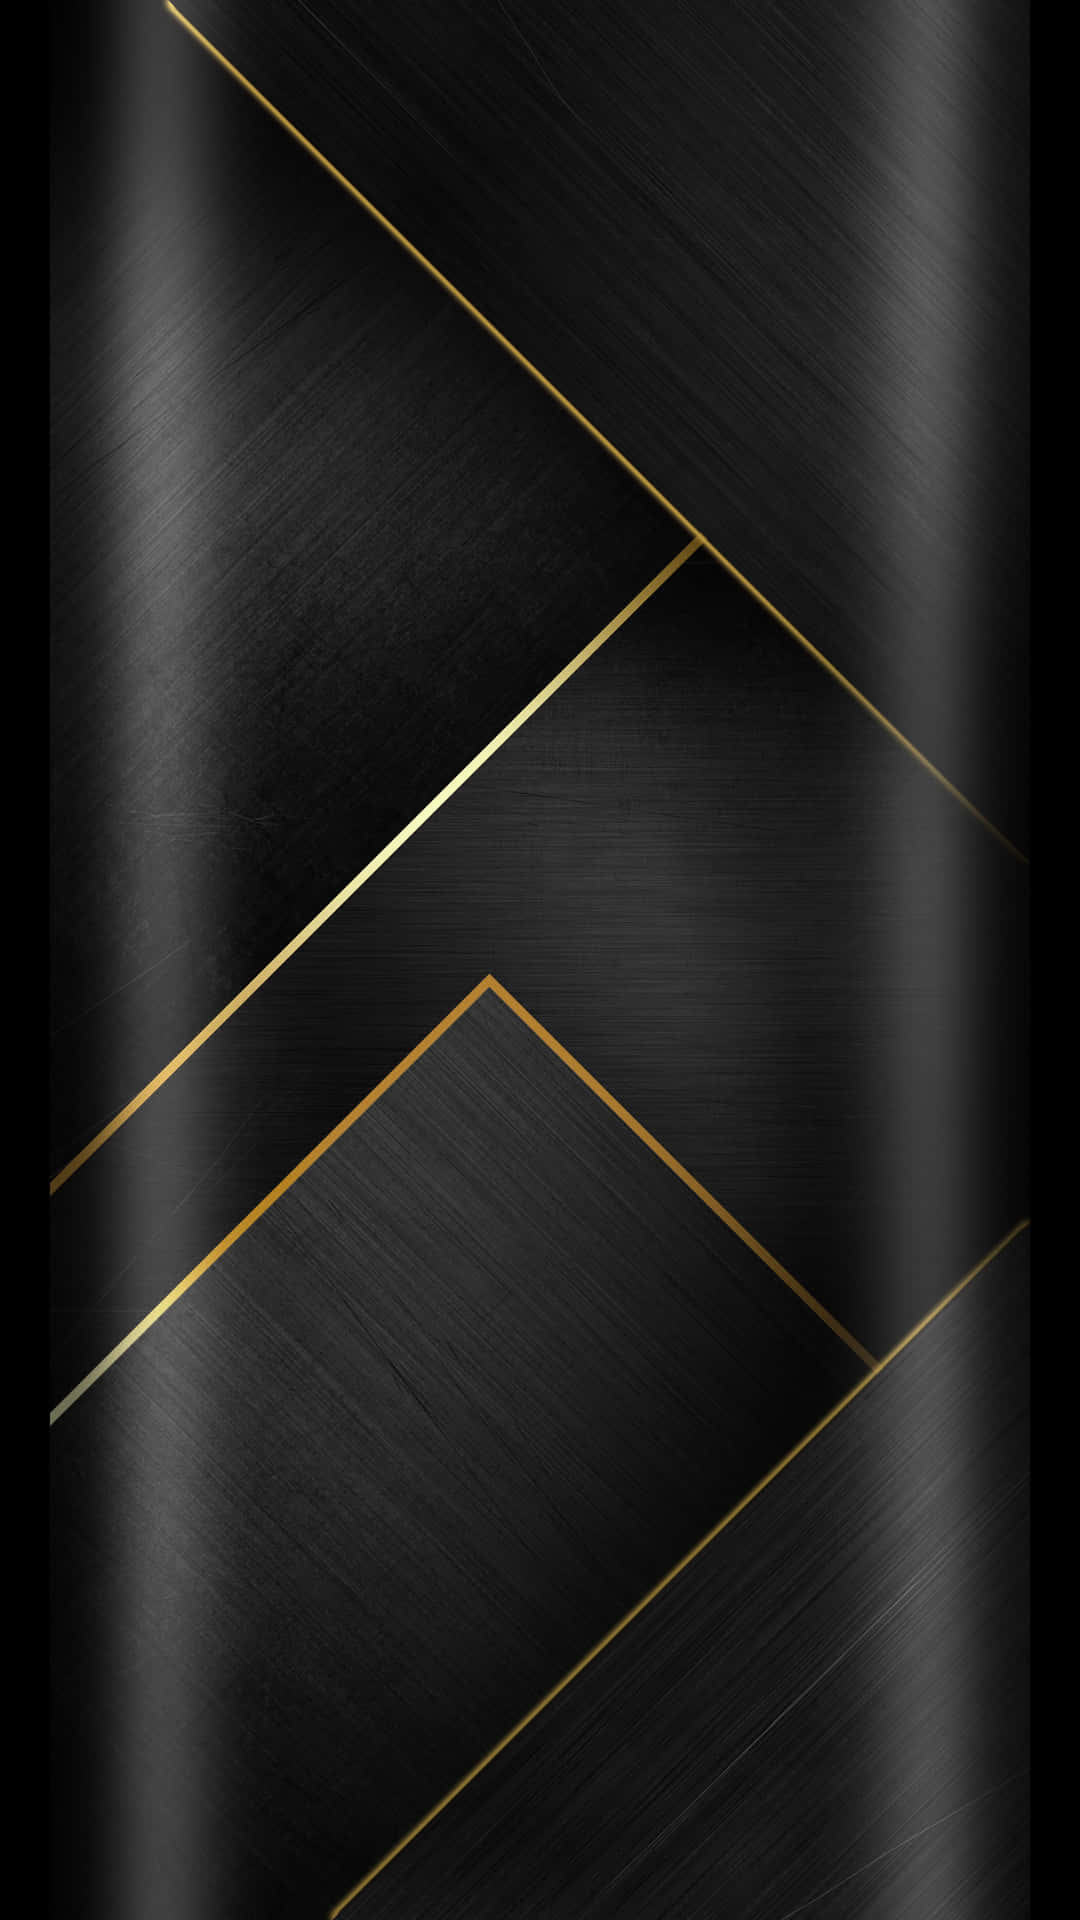 "This Elegant Black and Gold Background Combines Beauty and Radiance"